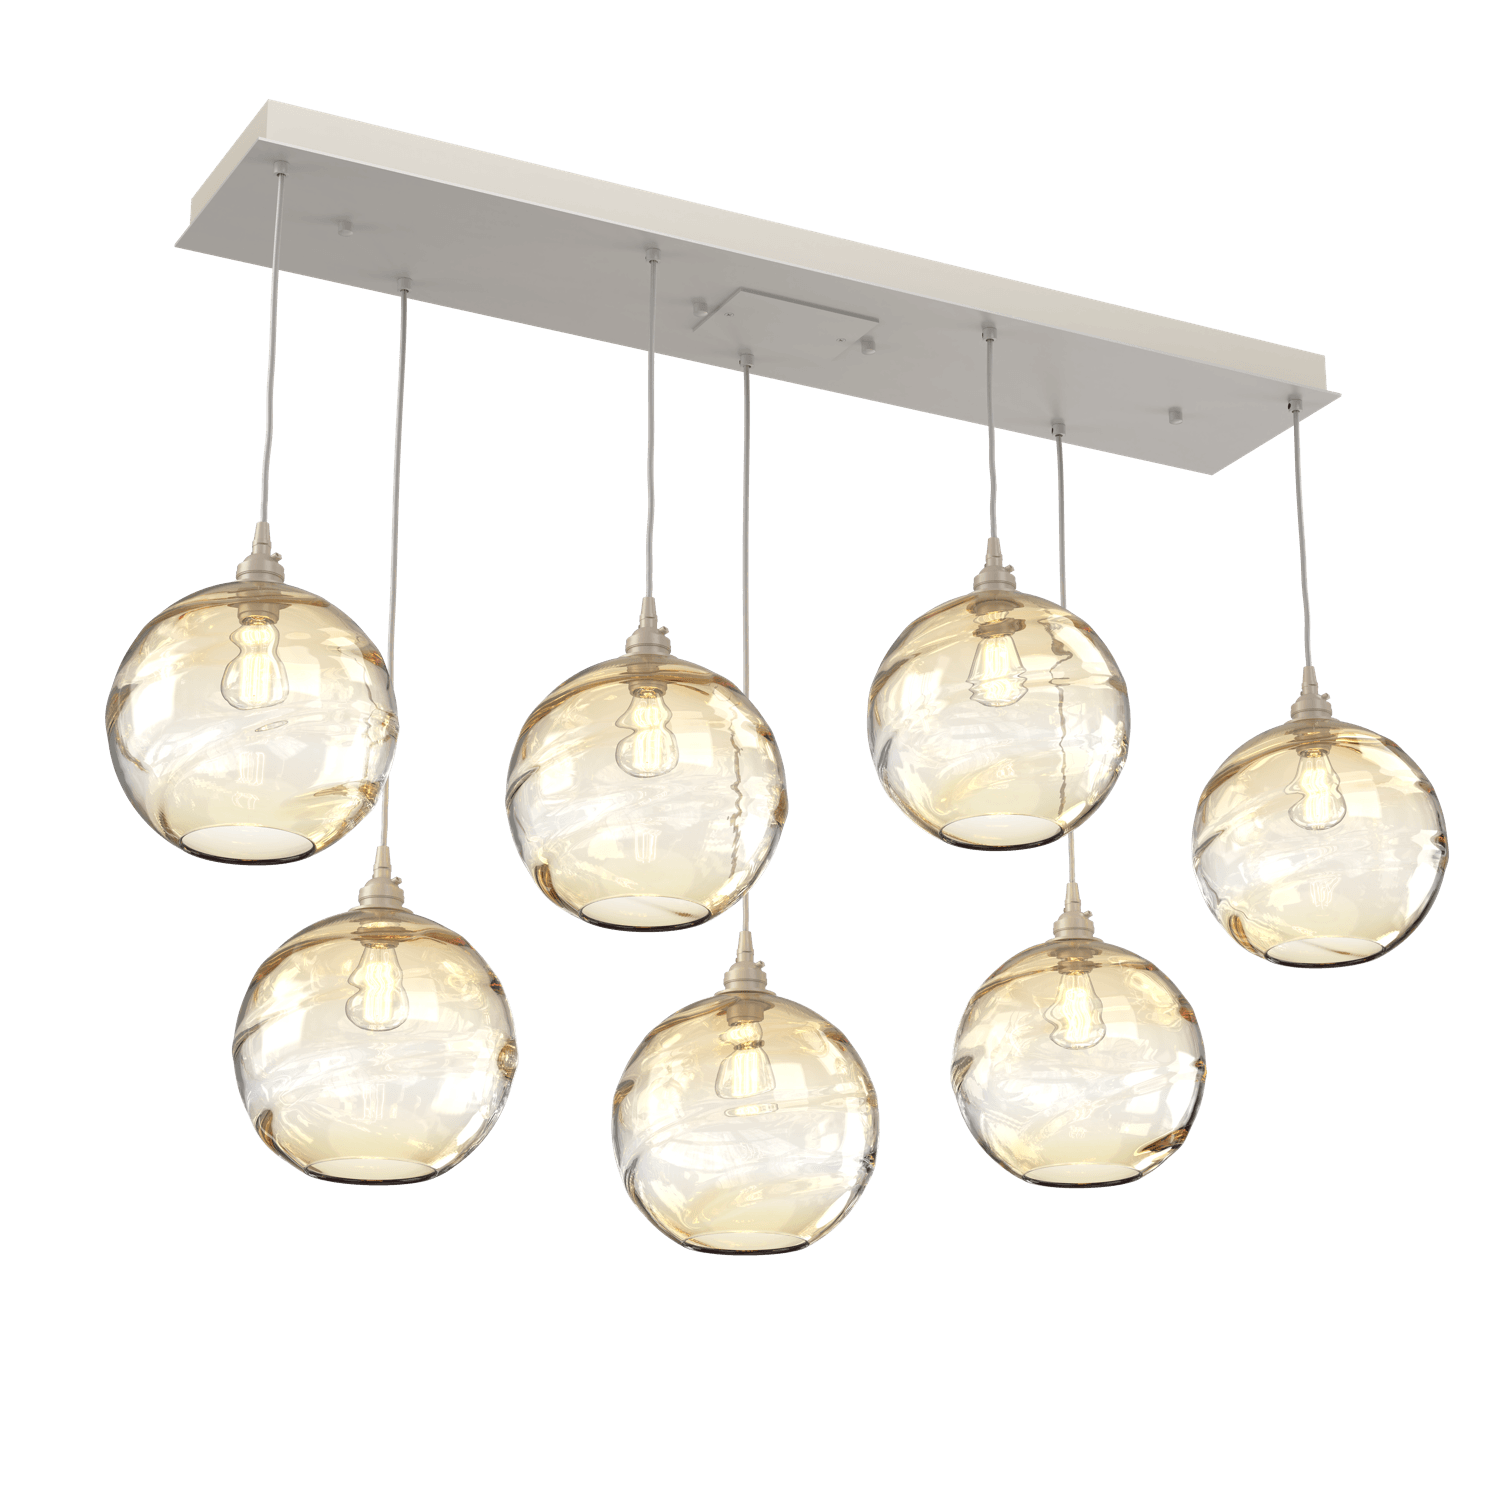 PLB0047-07-BS-OA-Hammerton-Studio-Optic-Blown-Glass-Terra-7-light-linear-pendant-chandelier-with-metallic-beige-silver-finish-and-optic-amber-blown-glass-shades-and-incandescent-lamping